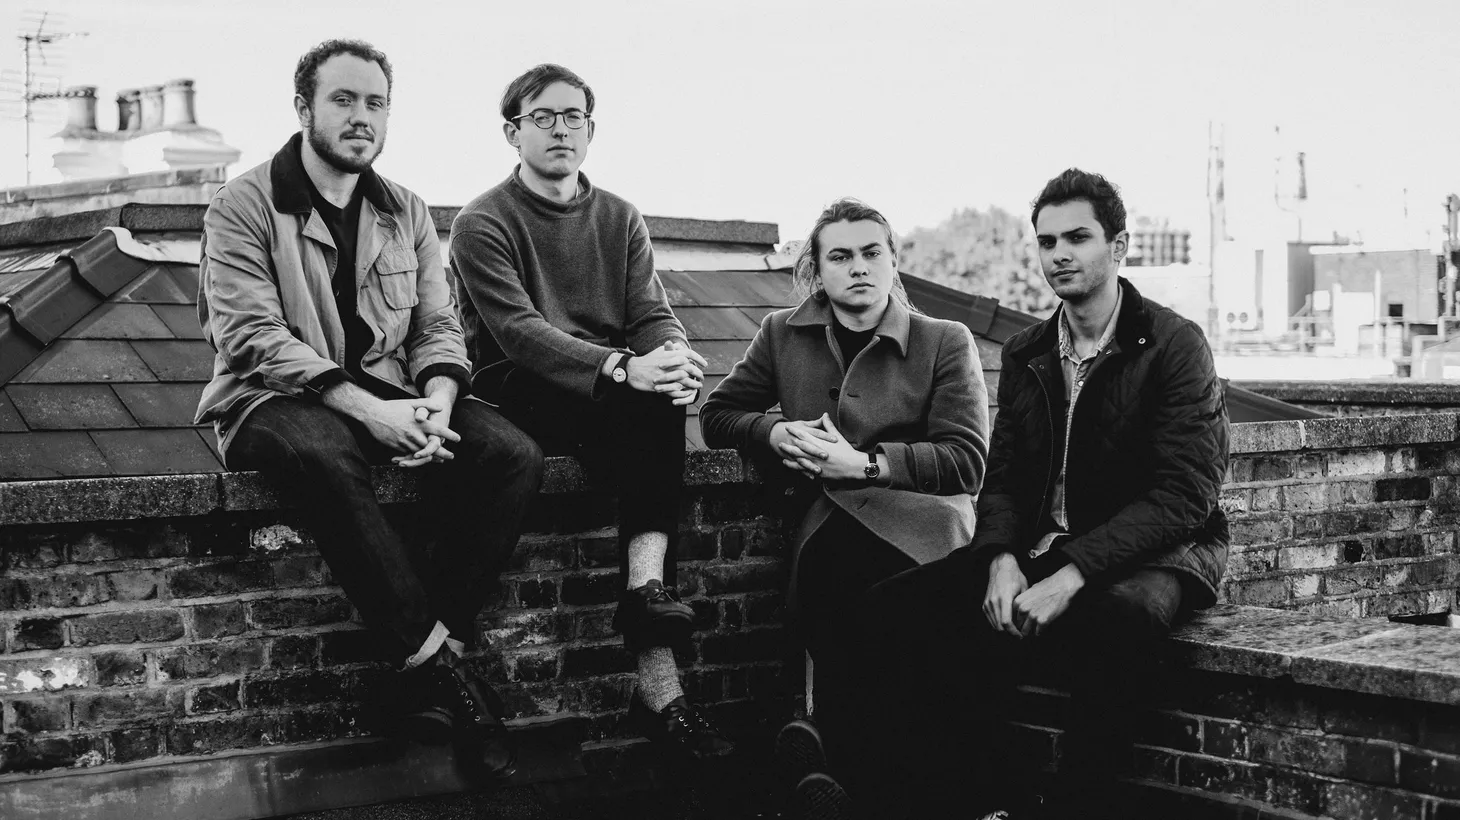 North London's Bombay Bicycle Club have an interesting, layered take on indie pop that is always enjoyable in a live setting.